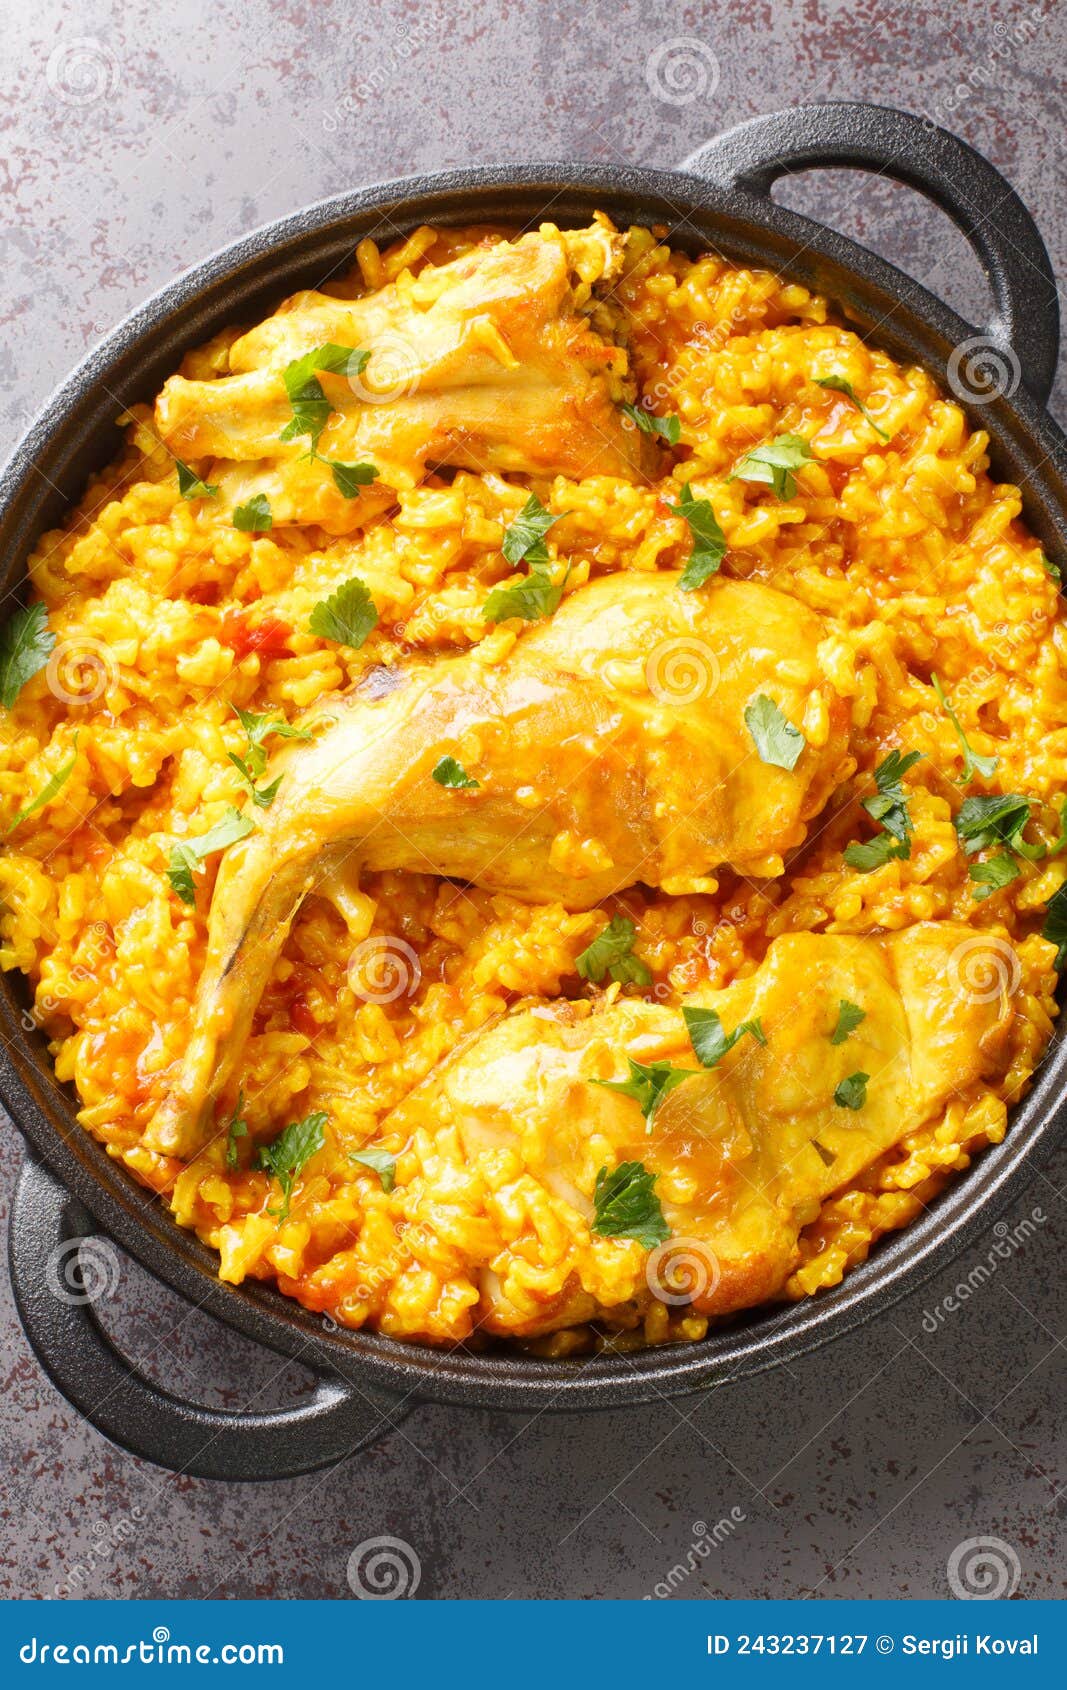 typical spanish rice with rabbit arroz con conejo closeup in the pan. vertical top view